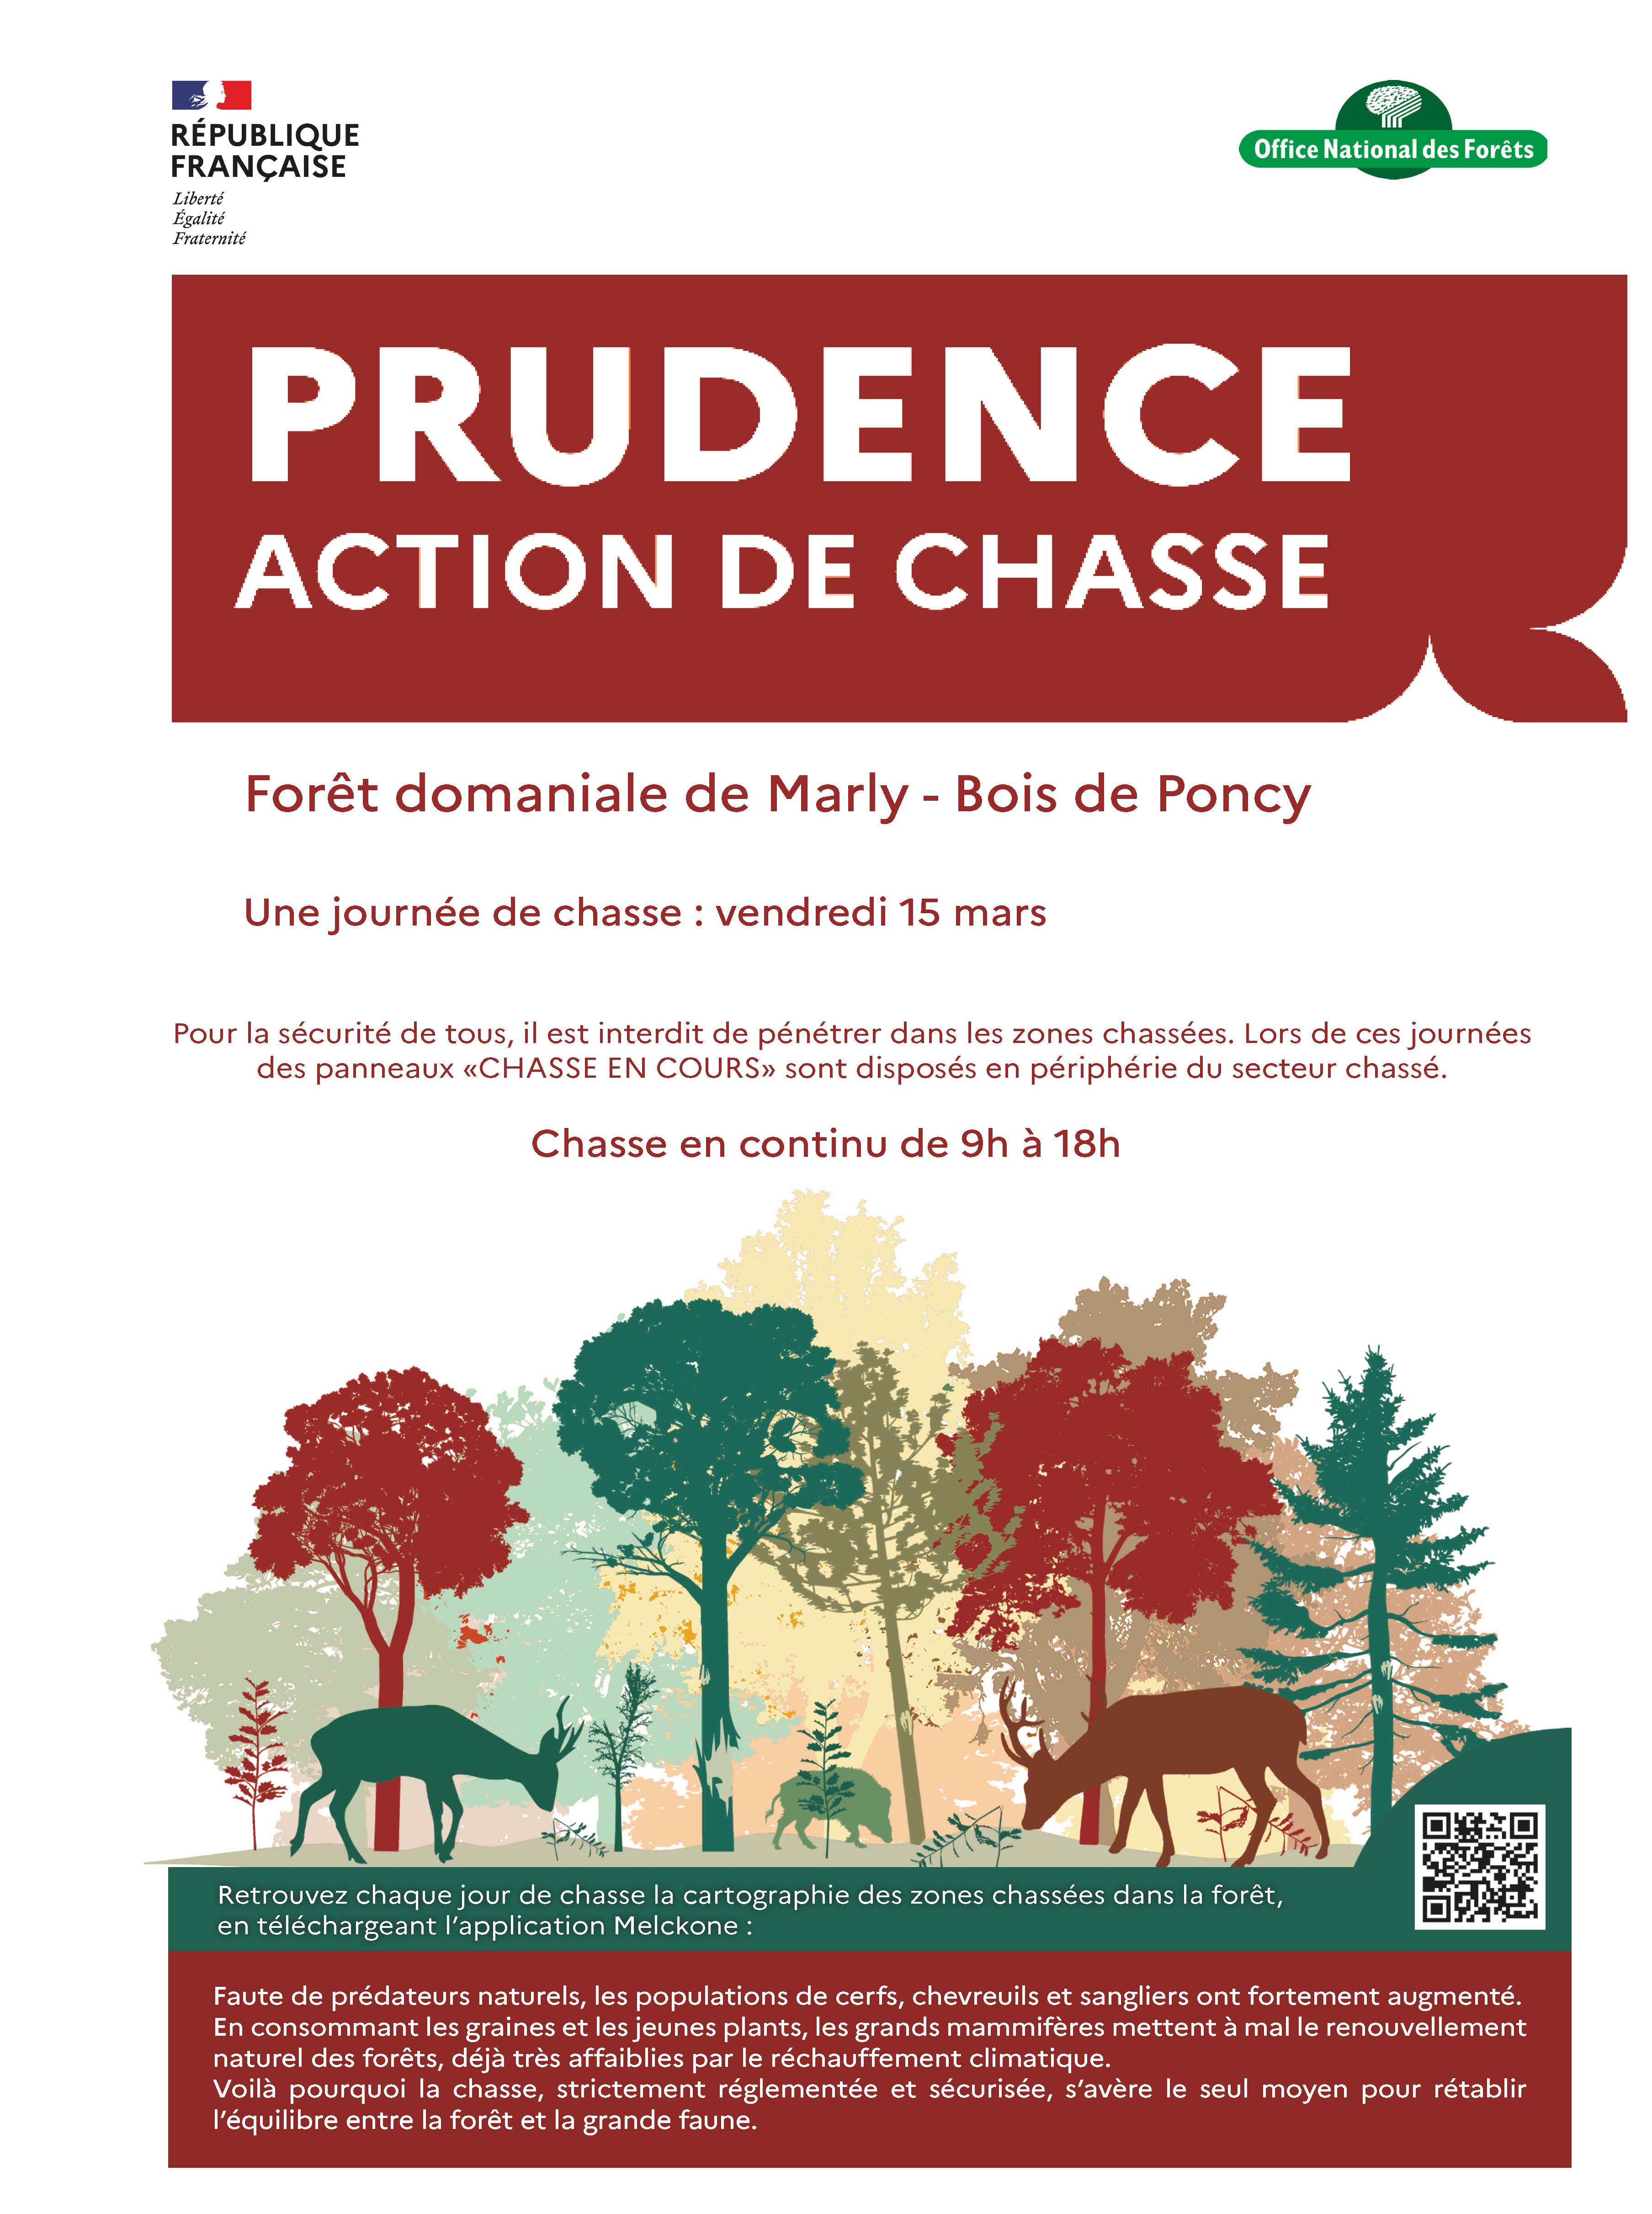 Affiche_chasse_Marly-Bois_de_Poncy.jpg